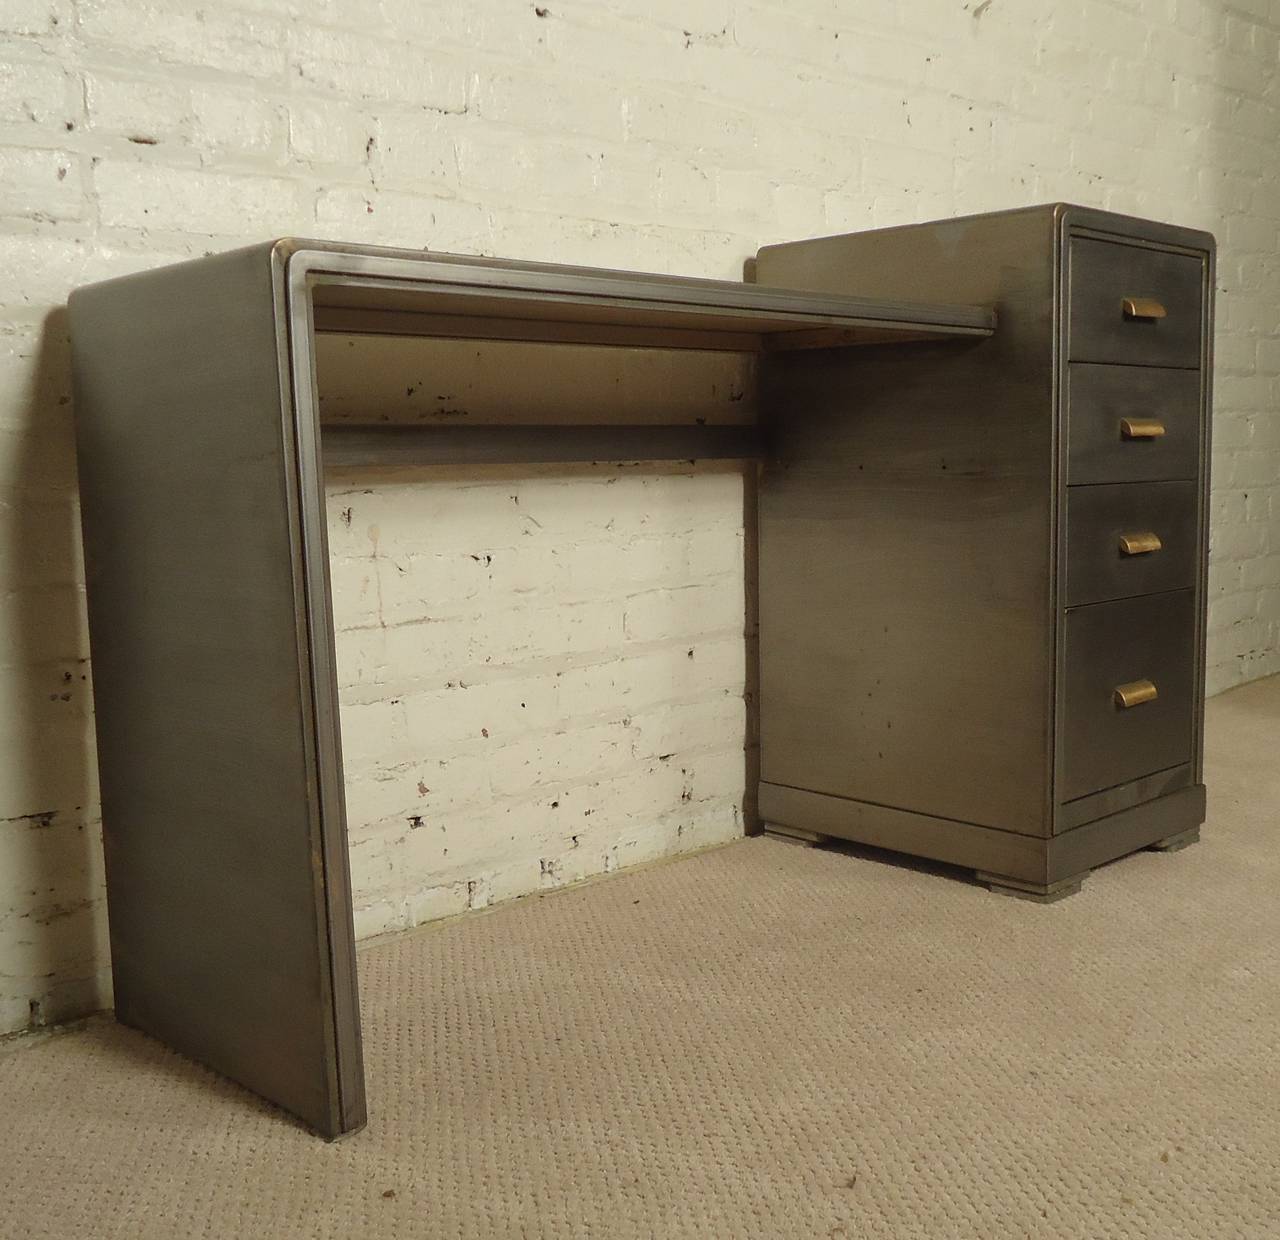 Vintage deco style desk with unusual tiered top designed for Simmons by Norman Bel Geddes. Newly restored in a bare metal style finish with complimenting original brass handles. Open desk space with ample storage.
Kneehole dimensions: 33